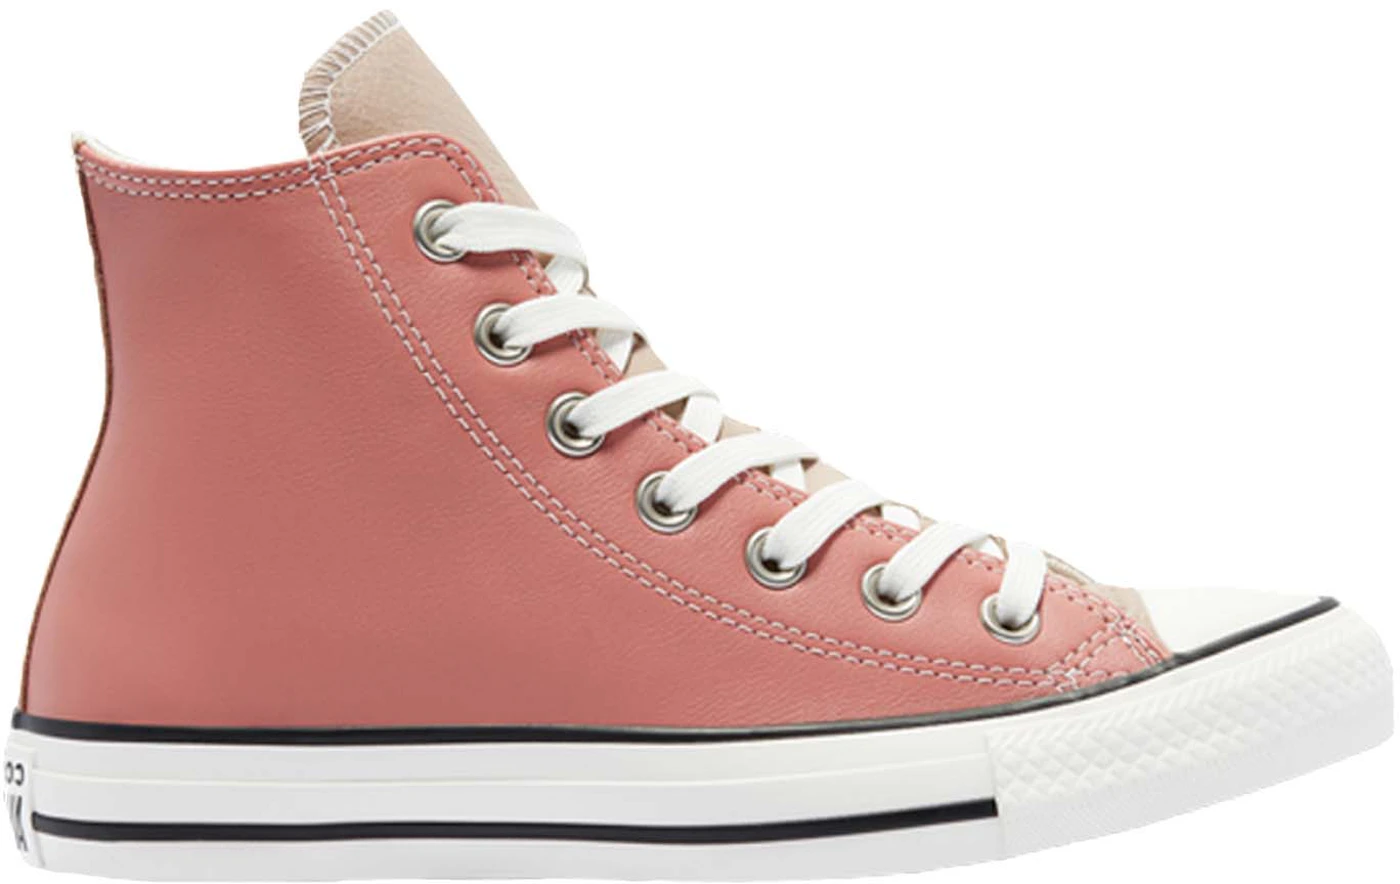 Converse Chuck Taylor All Star Hi Leather Neutral Tones Silt Red Rose ...